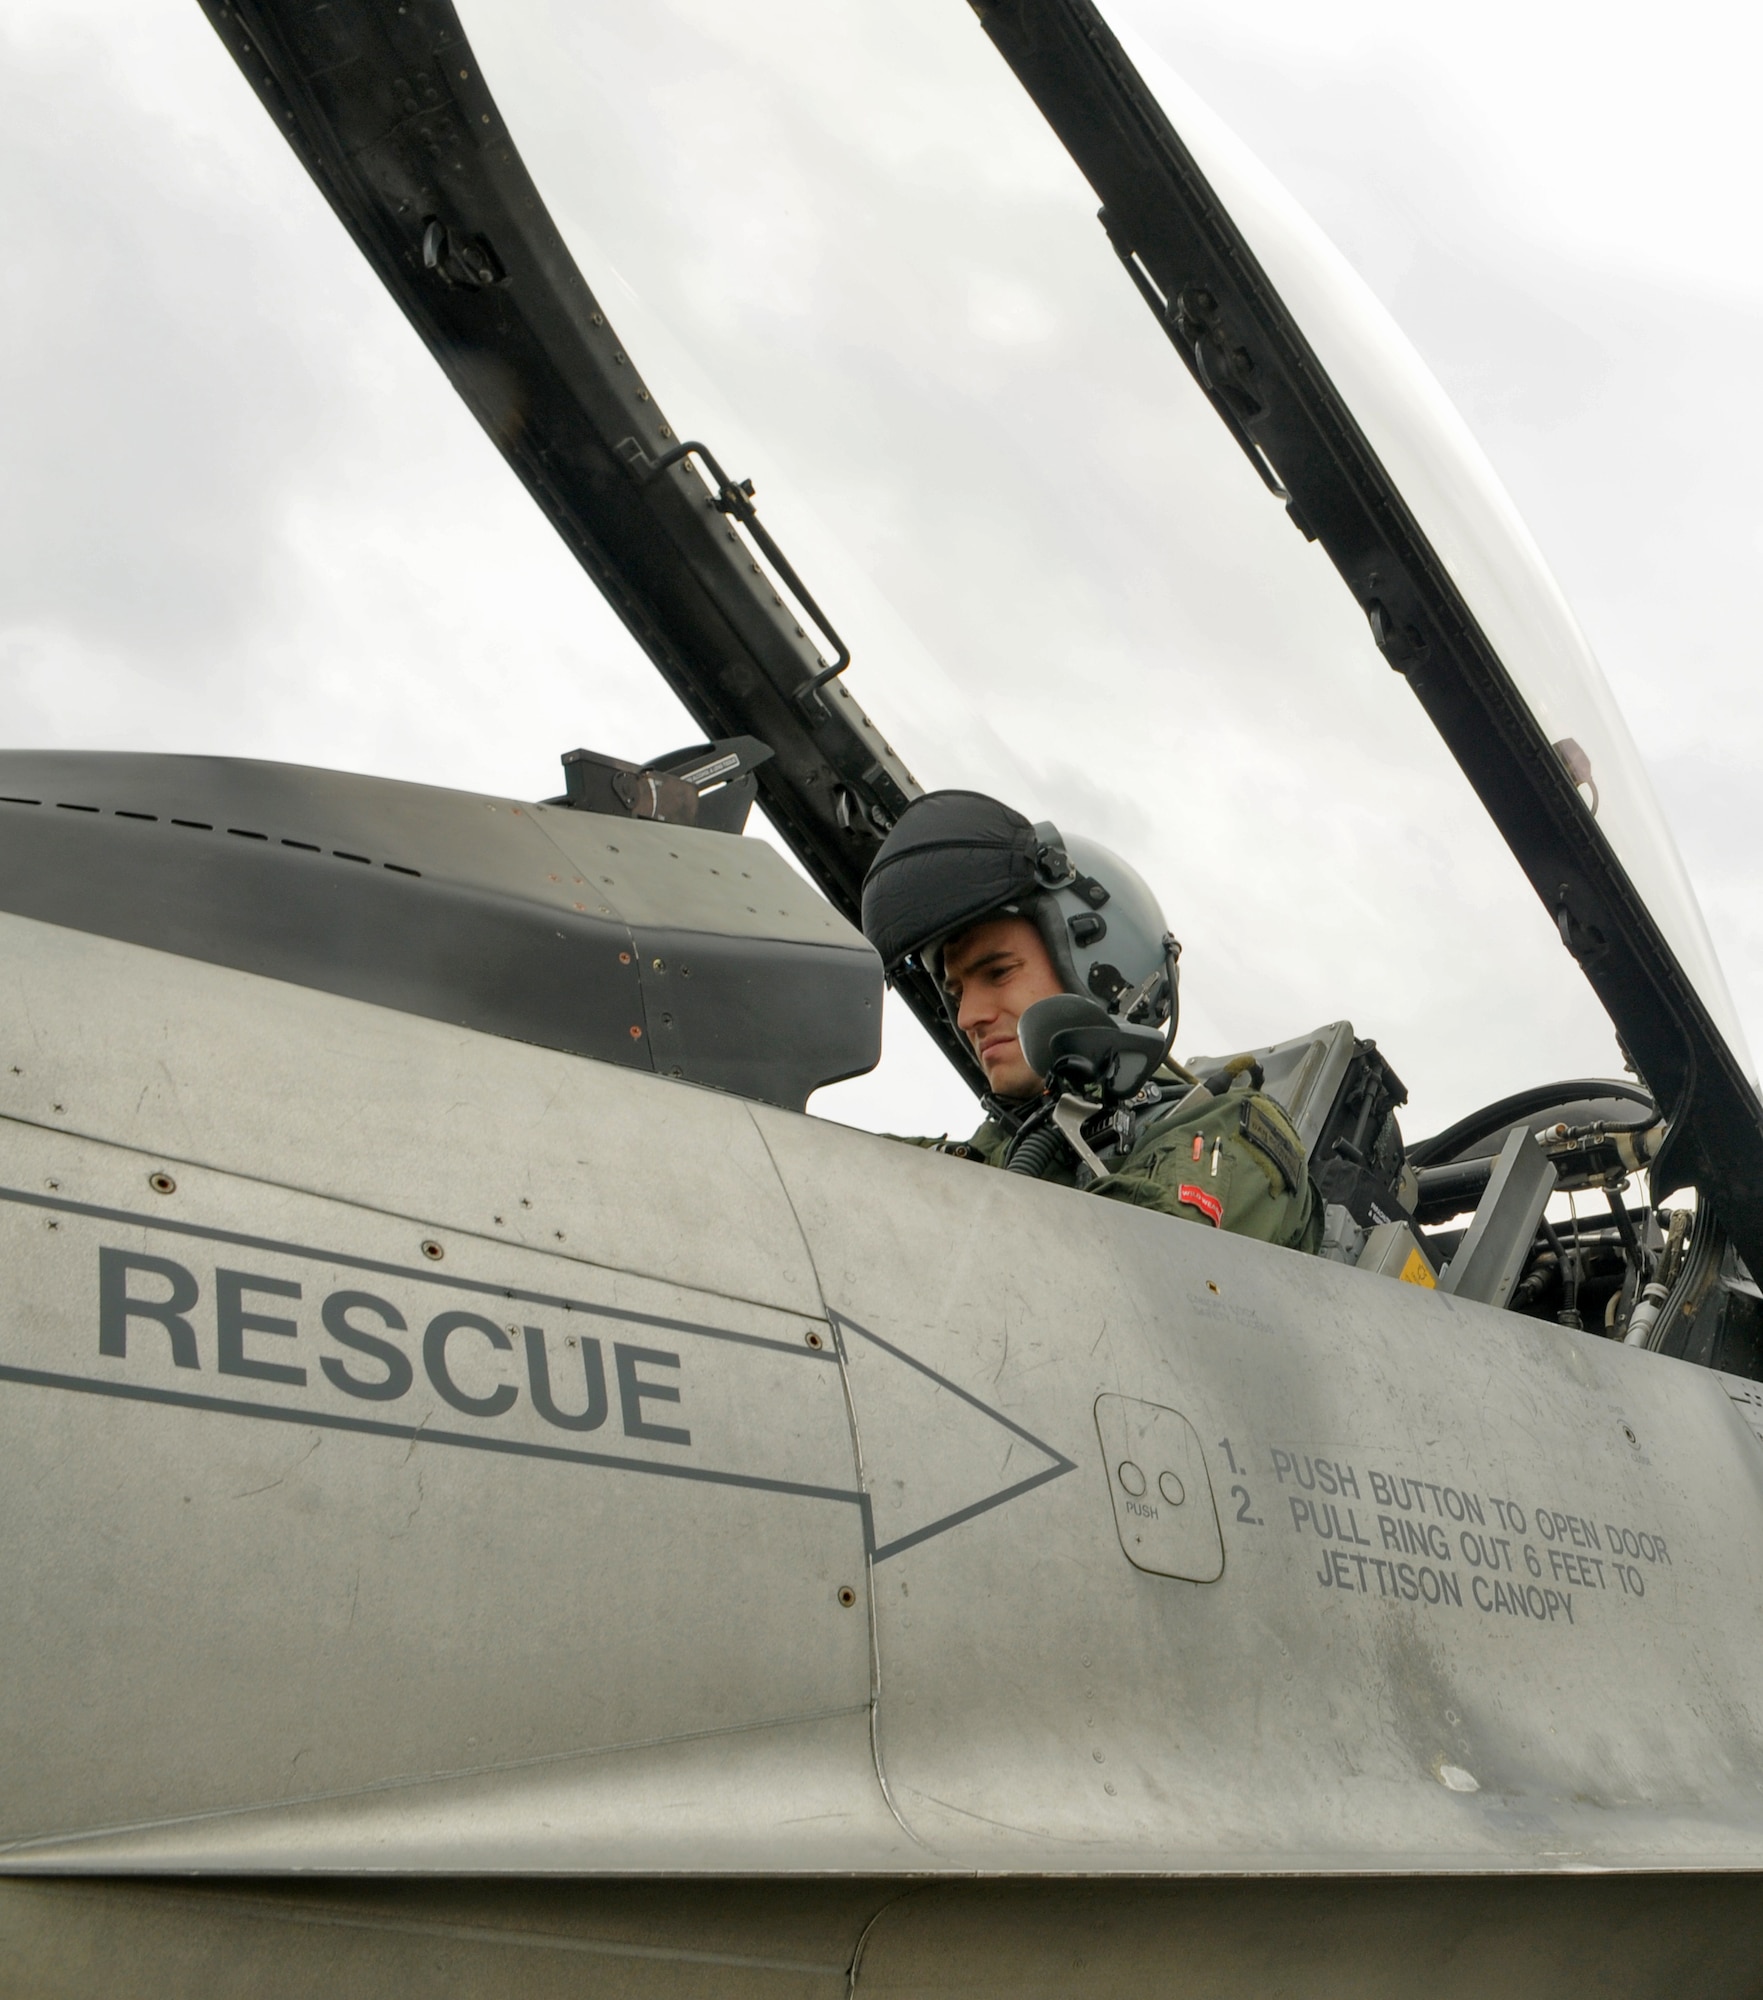 SPANGDAHLEM AIR BASE, Germany – Capt. Leroy Schreiber, 22nd Fighter Squadron F-16 Fighting Falcon fighter pilot, accomplishes pre-flight checks on an F-16 prior to takeoff in preparation for an Allied Strike mission Aug. 4. Allied Strike is an annual close air support exercise, providing realistic training for US and NATO participants in all aspects of tactical air control and CAS. (U.S. Air Force photo/Senior Airman Nick Wilson)